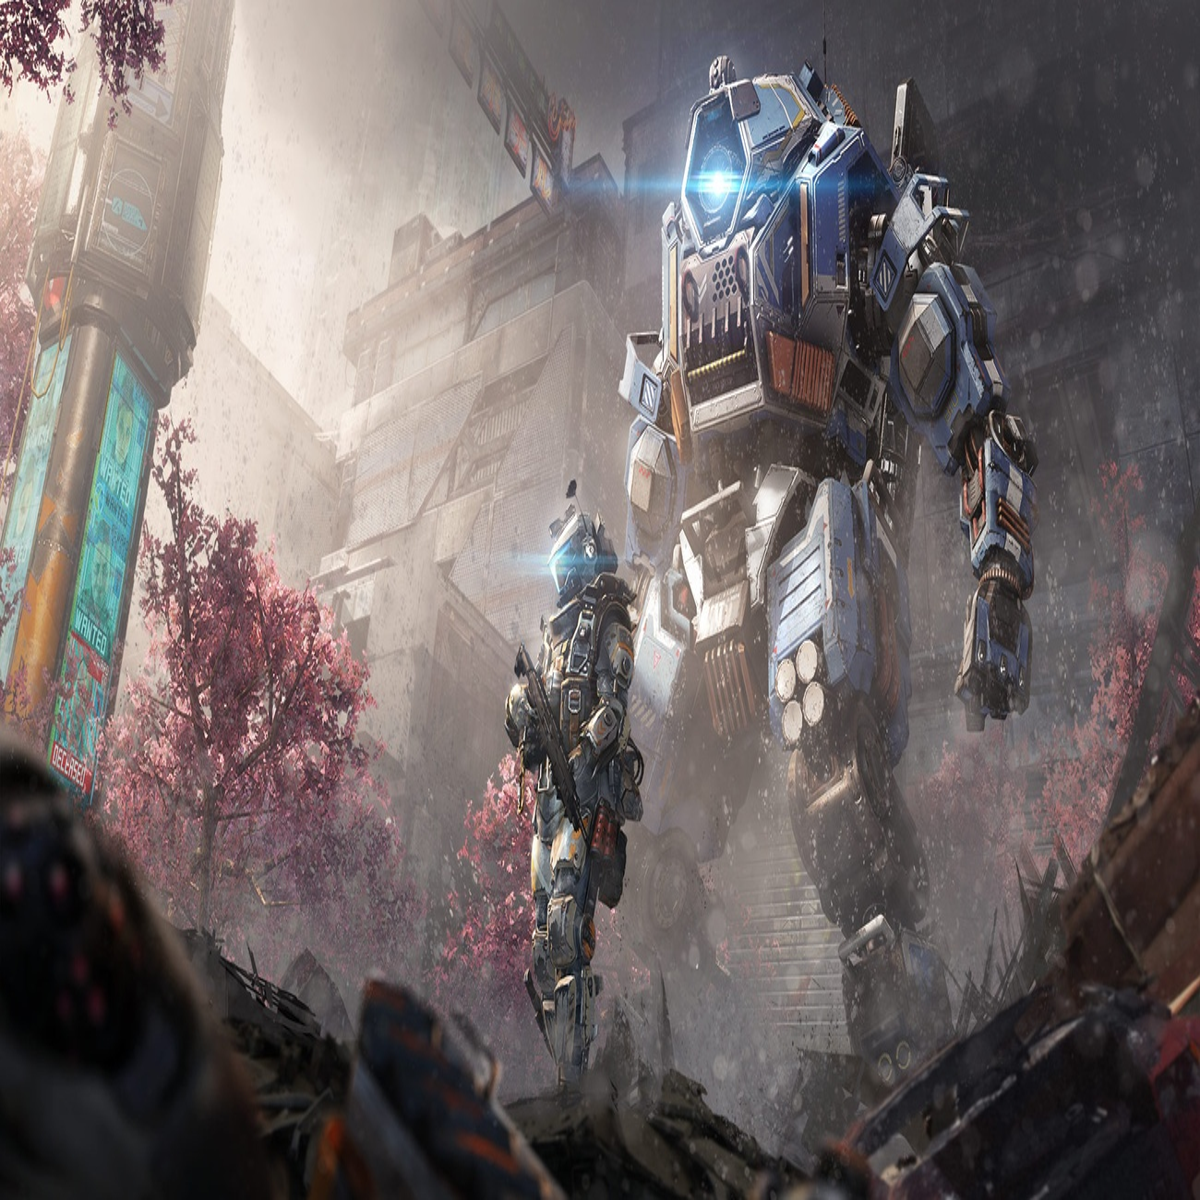 Apex Legends is giving Titanfall 2 multiplayer a small burst of life